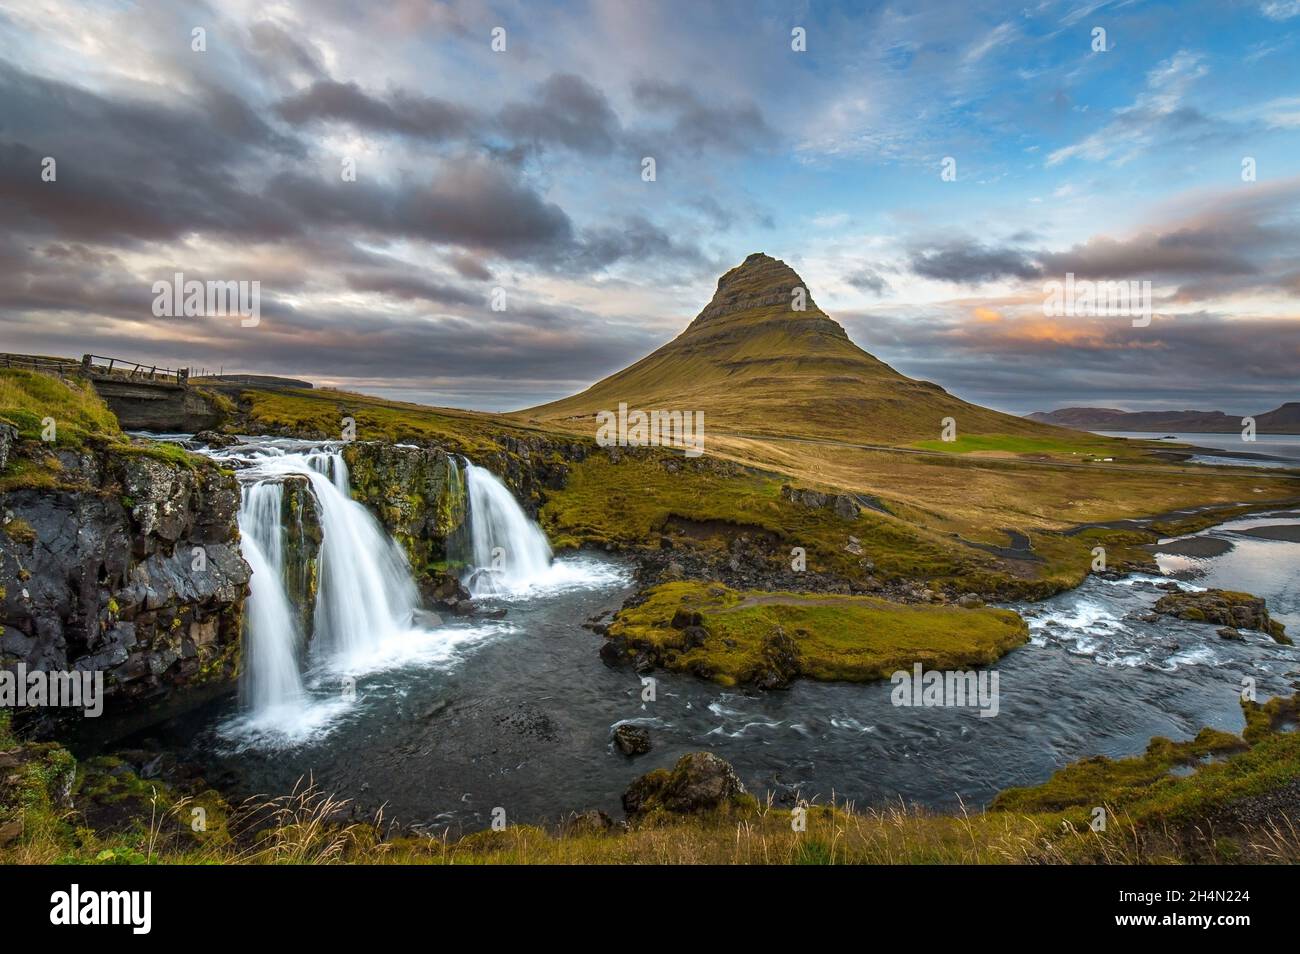 A waterfall (Kirkjufellfoss) and river in front of a mountain (Kirkjufell) and sunset in Iceland Stock Photo